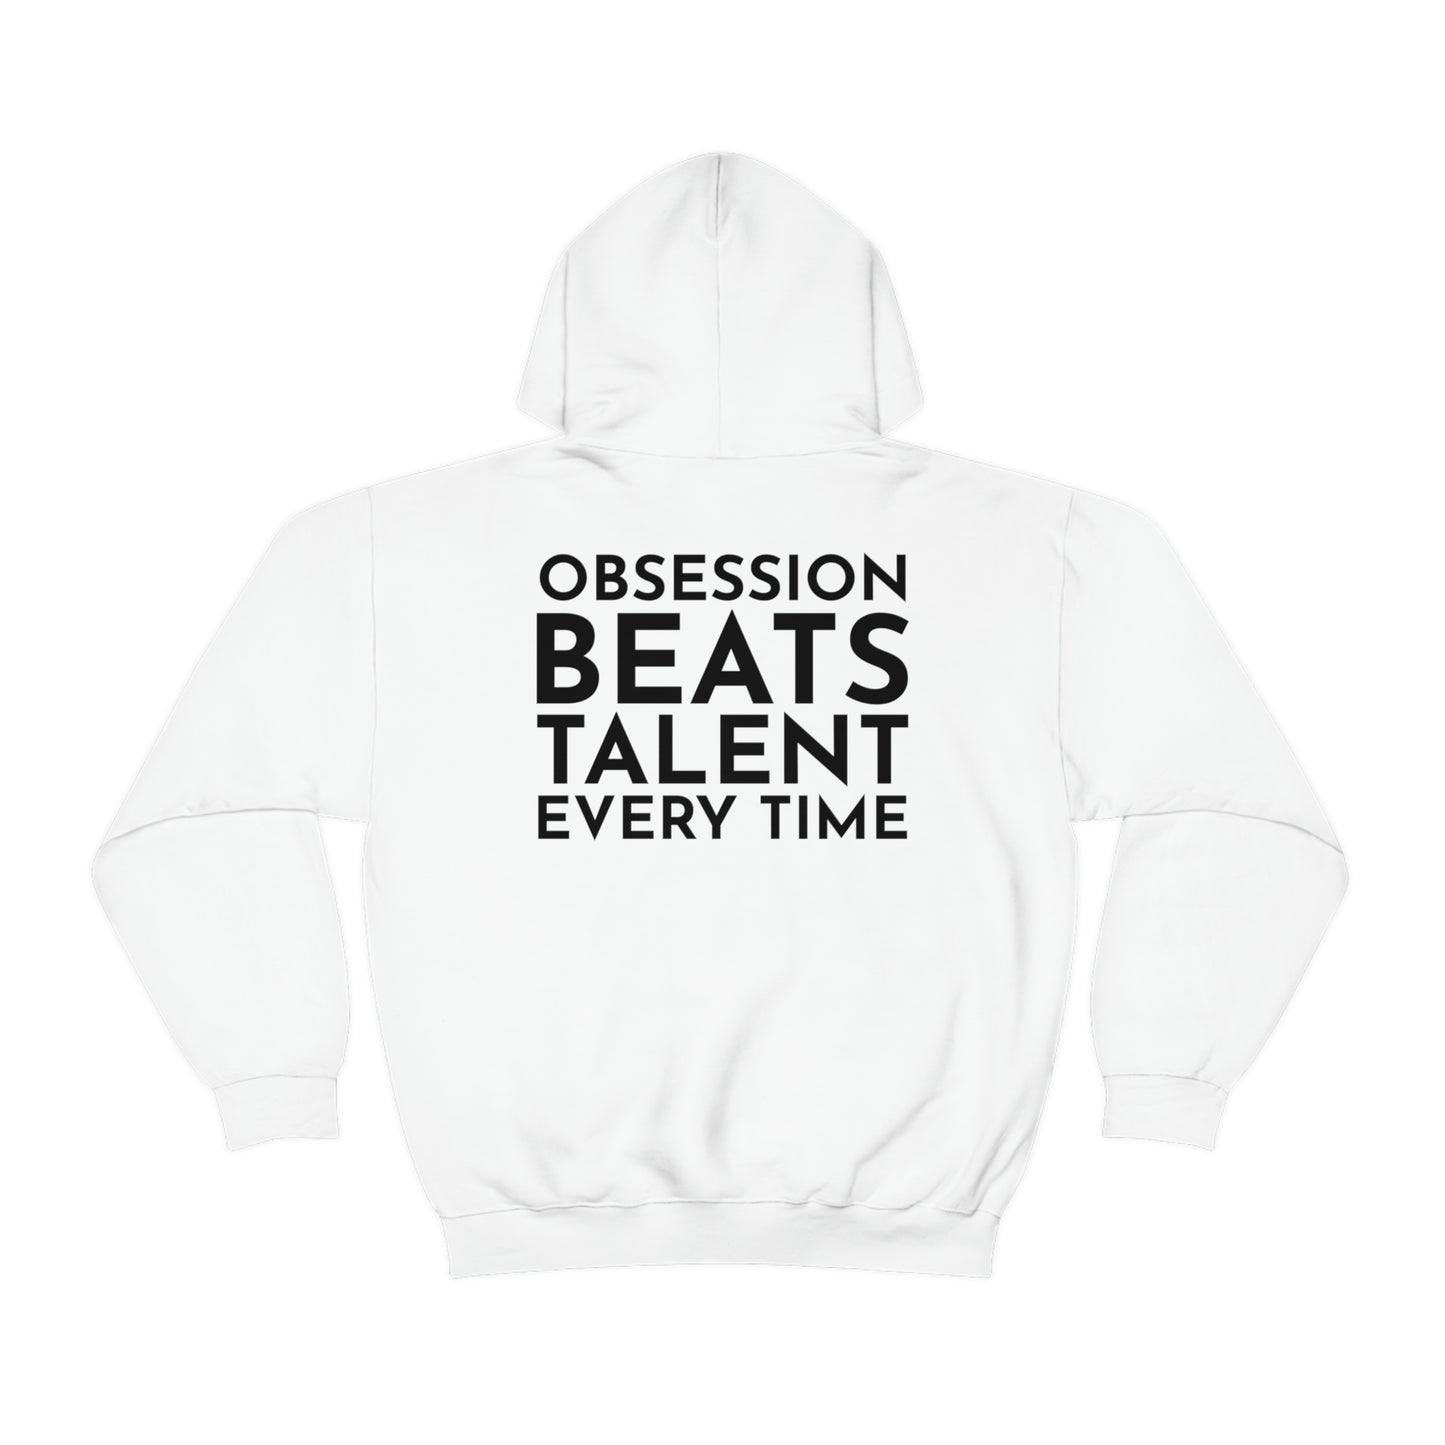 Alanys Viera: Obsession Beats Talent Every Time Hoodie